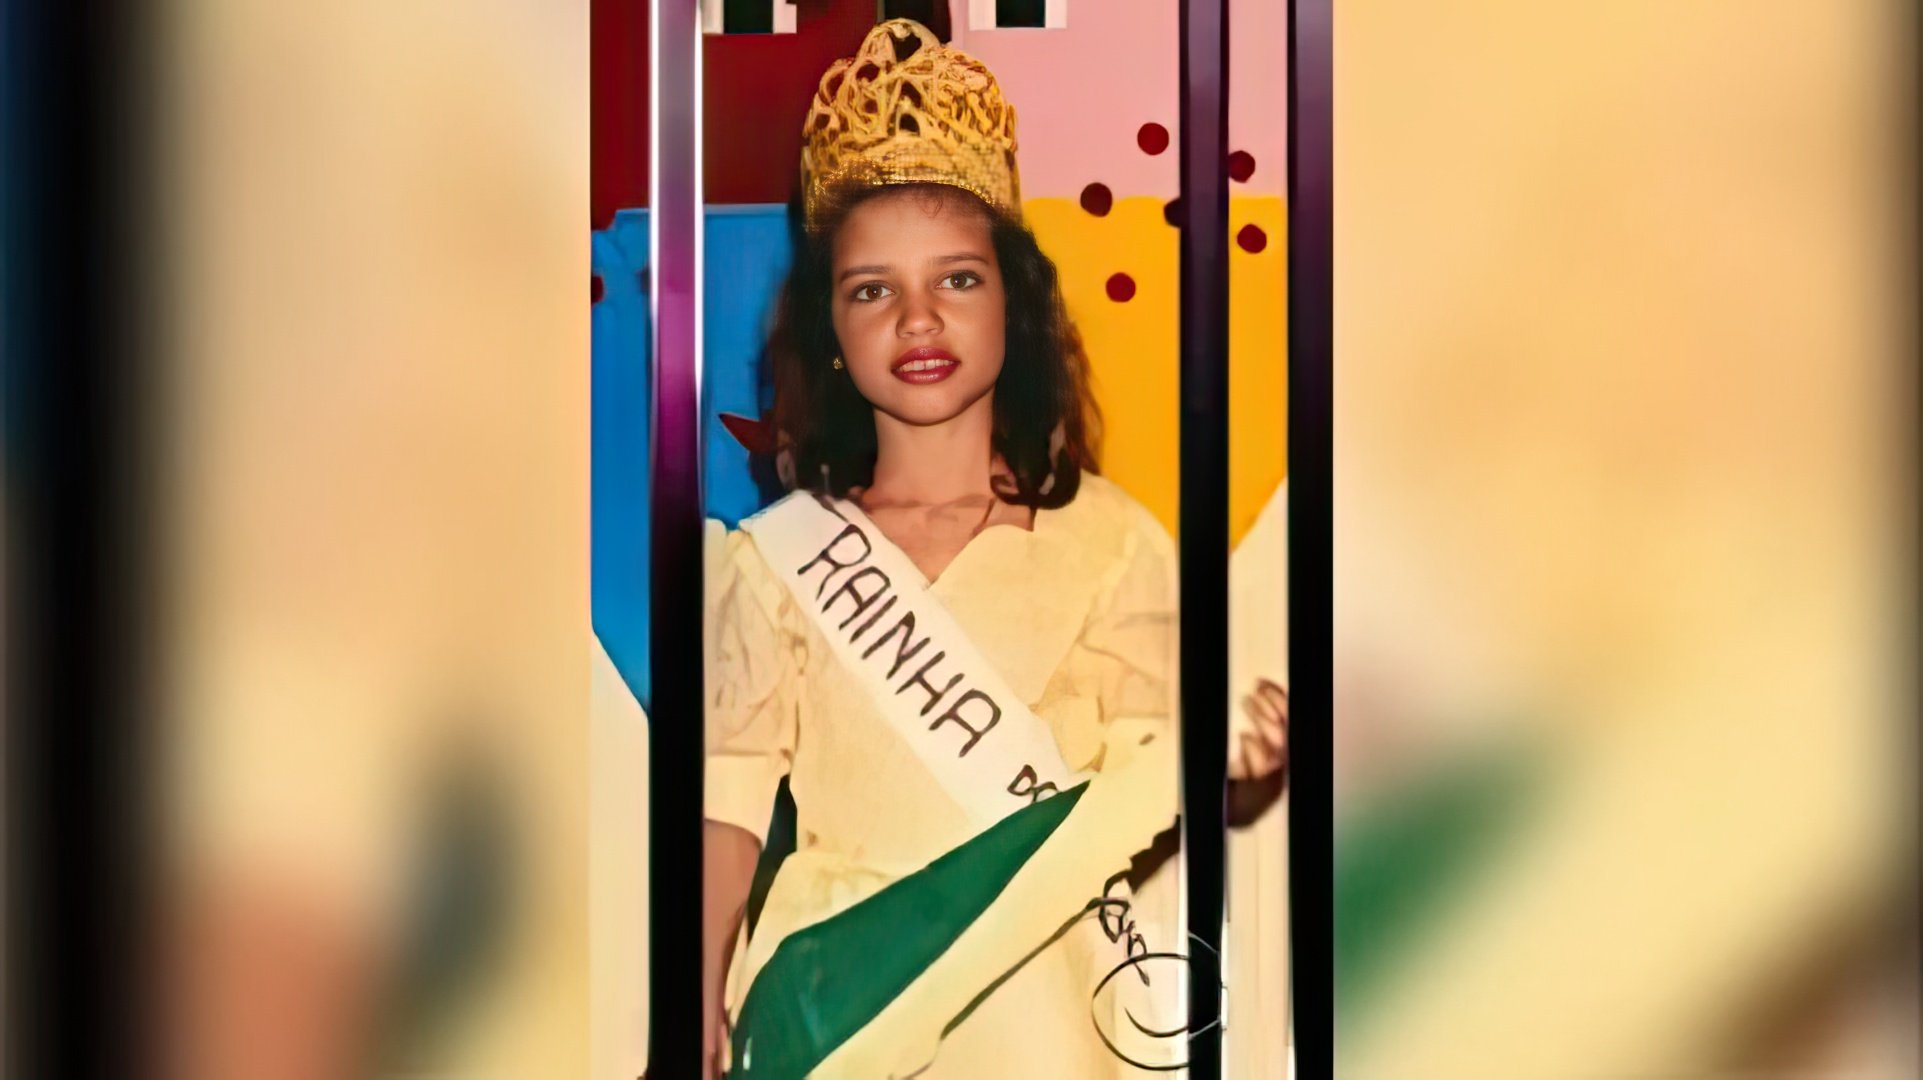 At the age of 13, Adriana Lima won a beauty contest for the first time